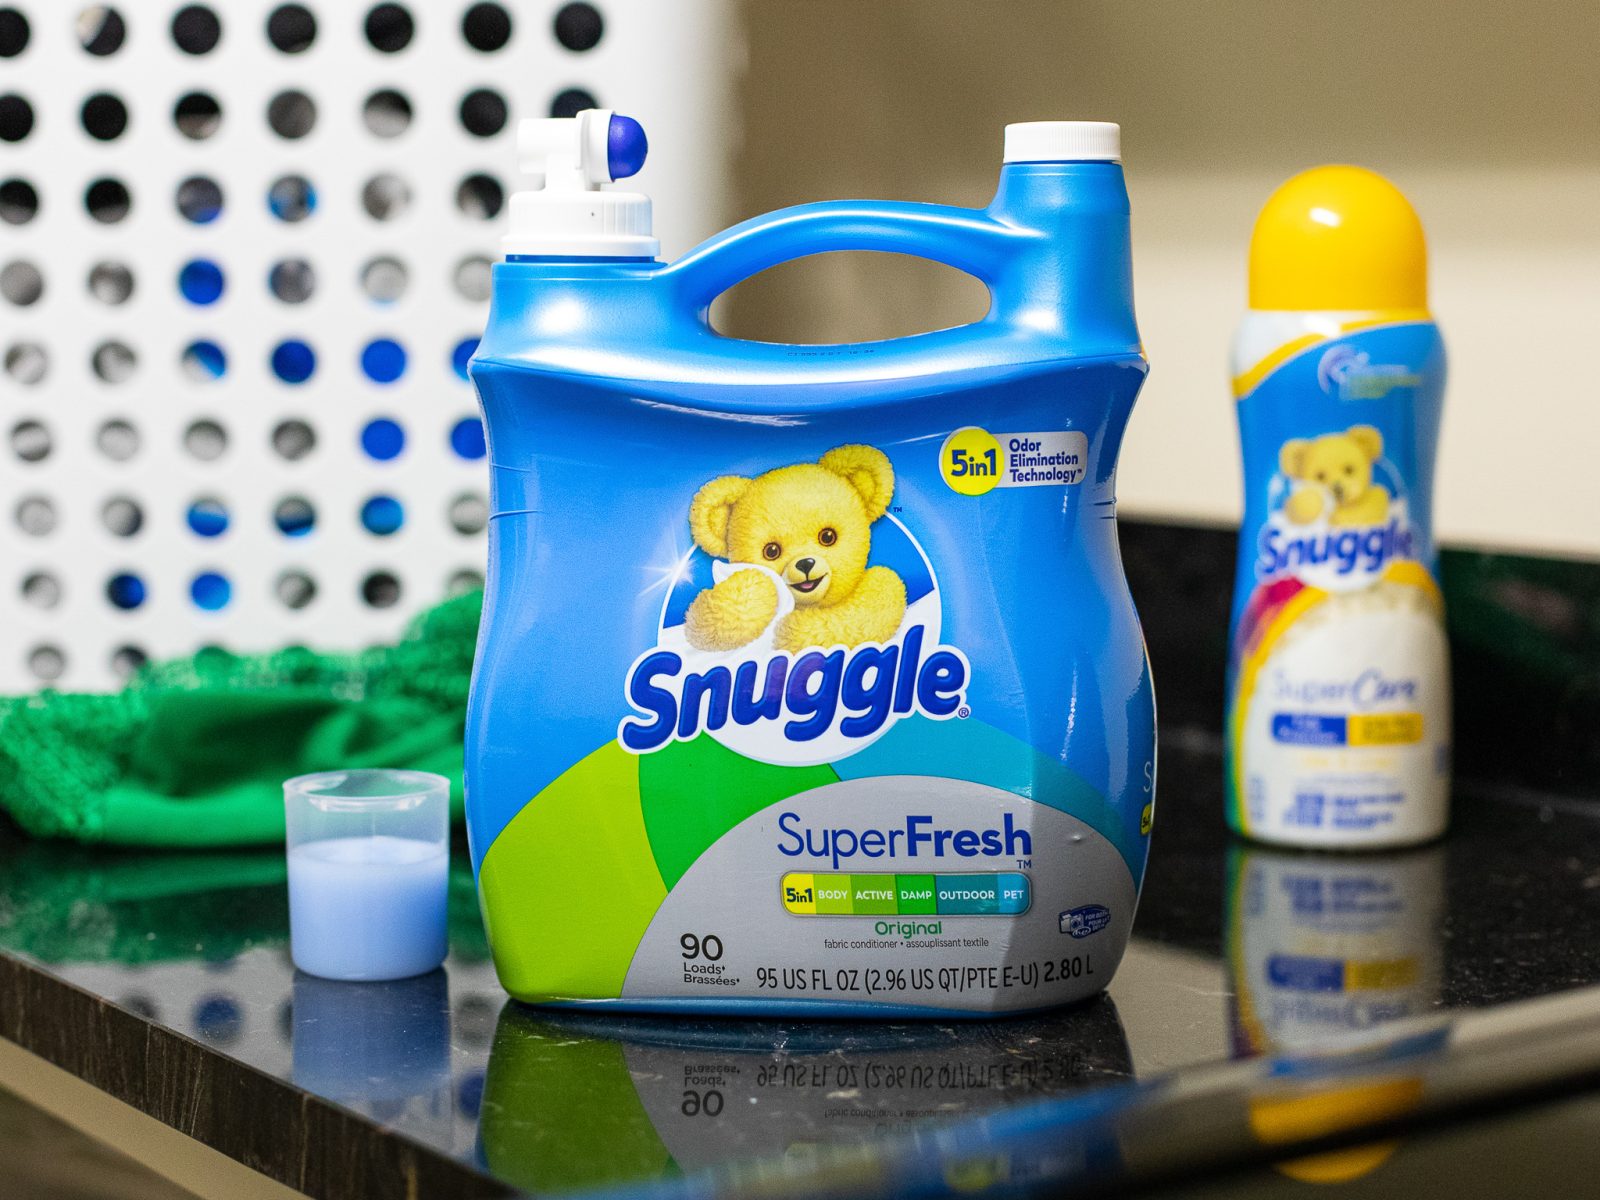 Big Bottles Of Snuggle Fabric Softener As Low As $3.99 At Kroger